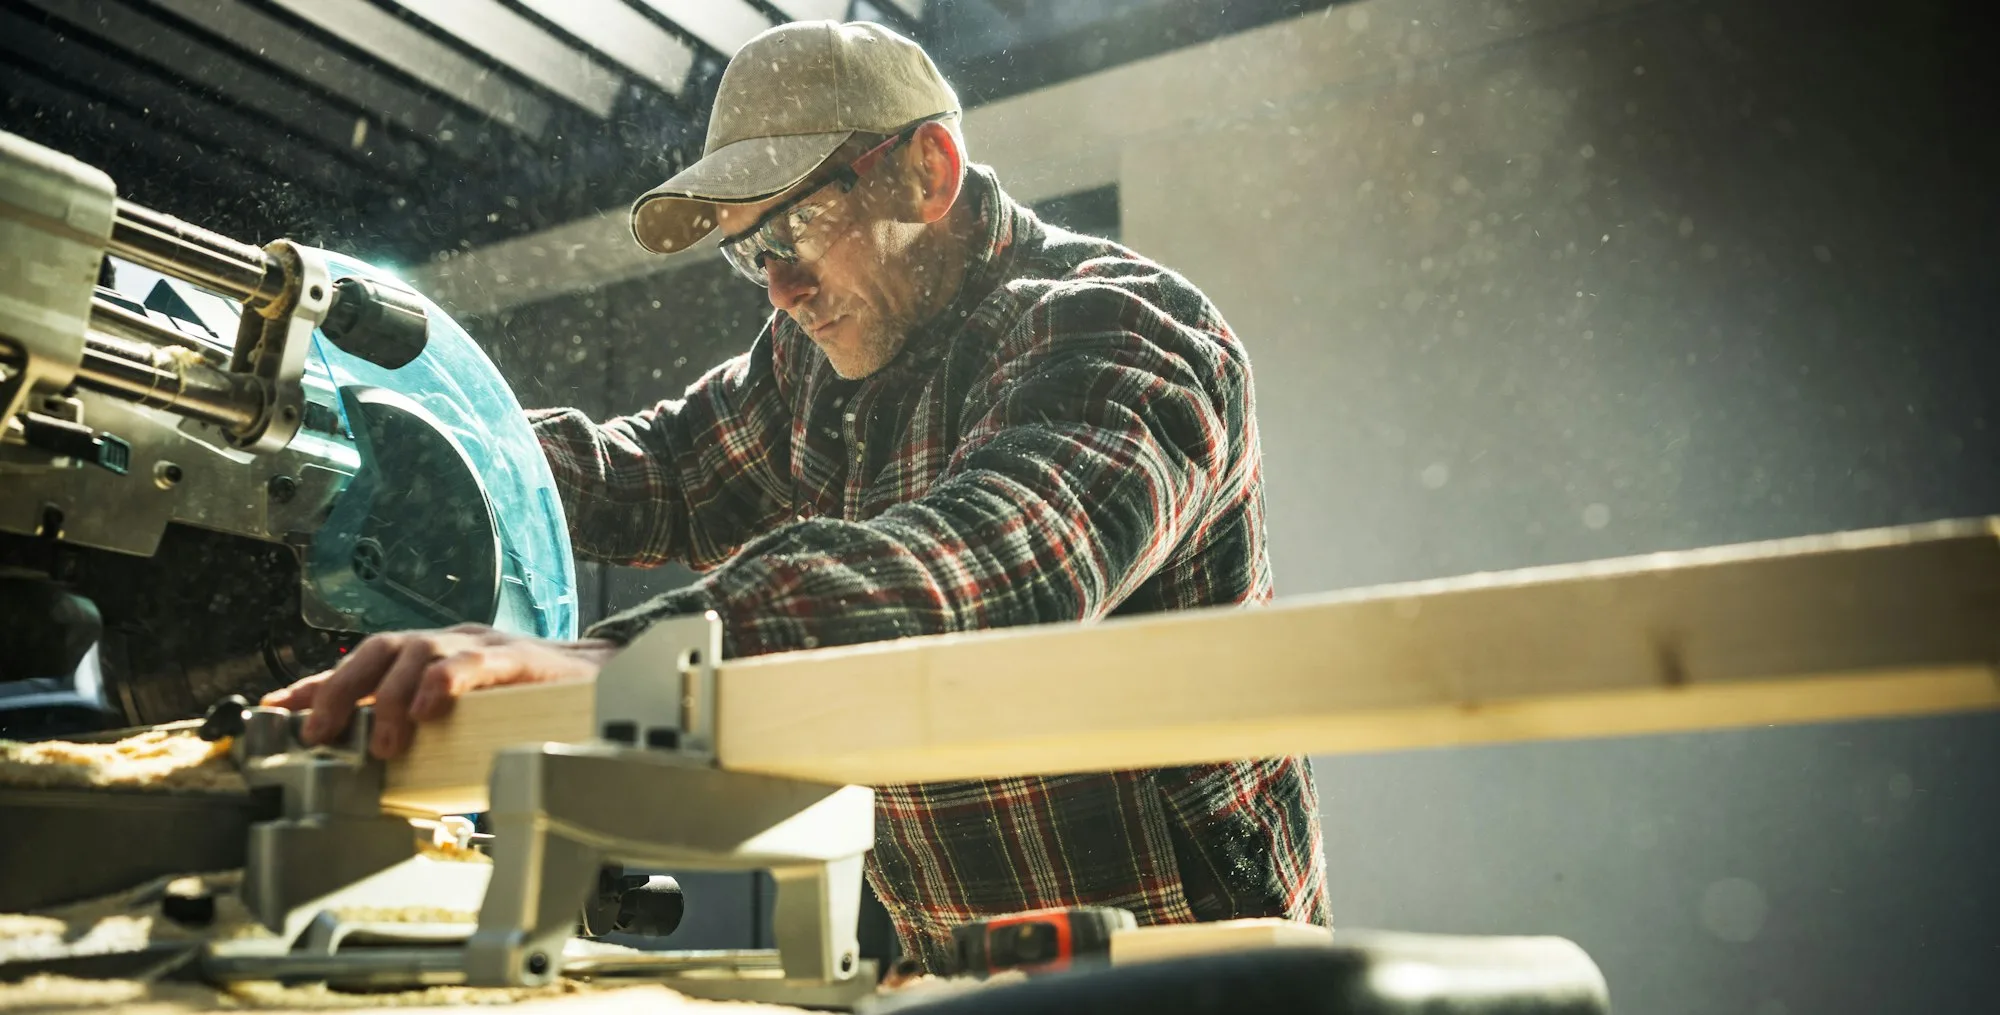 Woodworker General Construction Contractor Behind Powerful Wood Saw